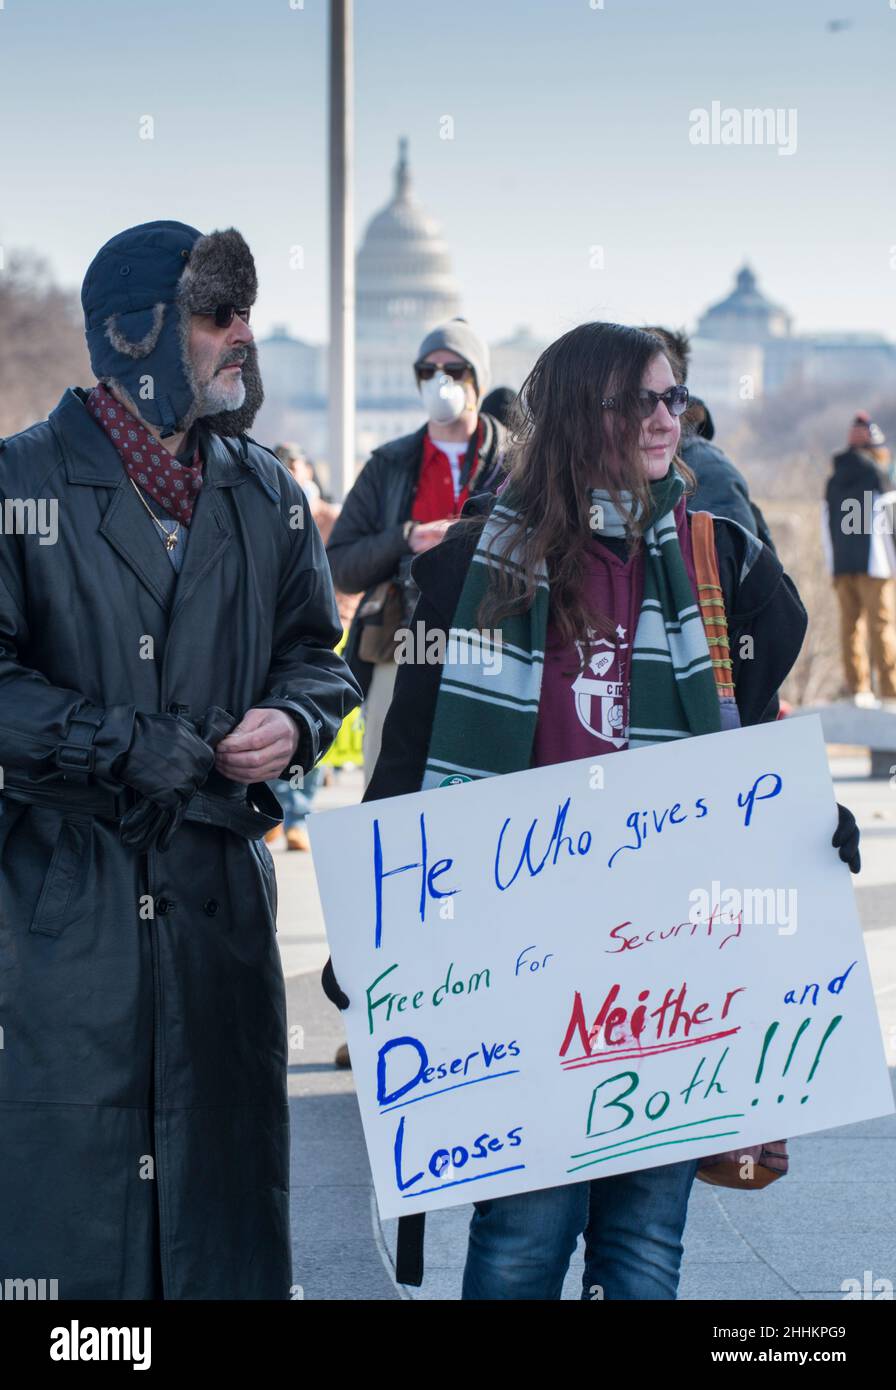 Demonstrators participate in a Defeat the Mandates march in Washington DC, on January 23, 2022, protesting mask and COVID-19 vaccination mandates. US. Stock Photo